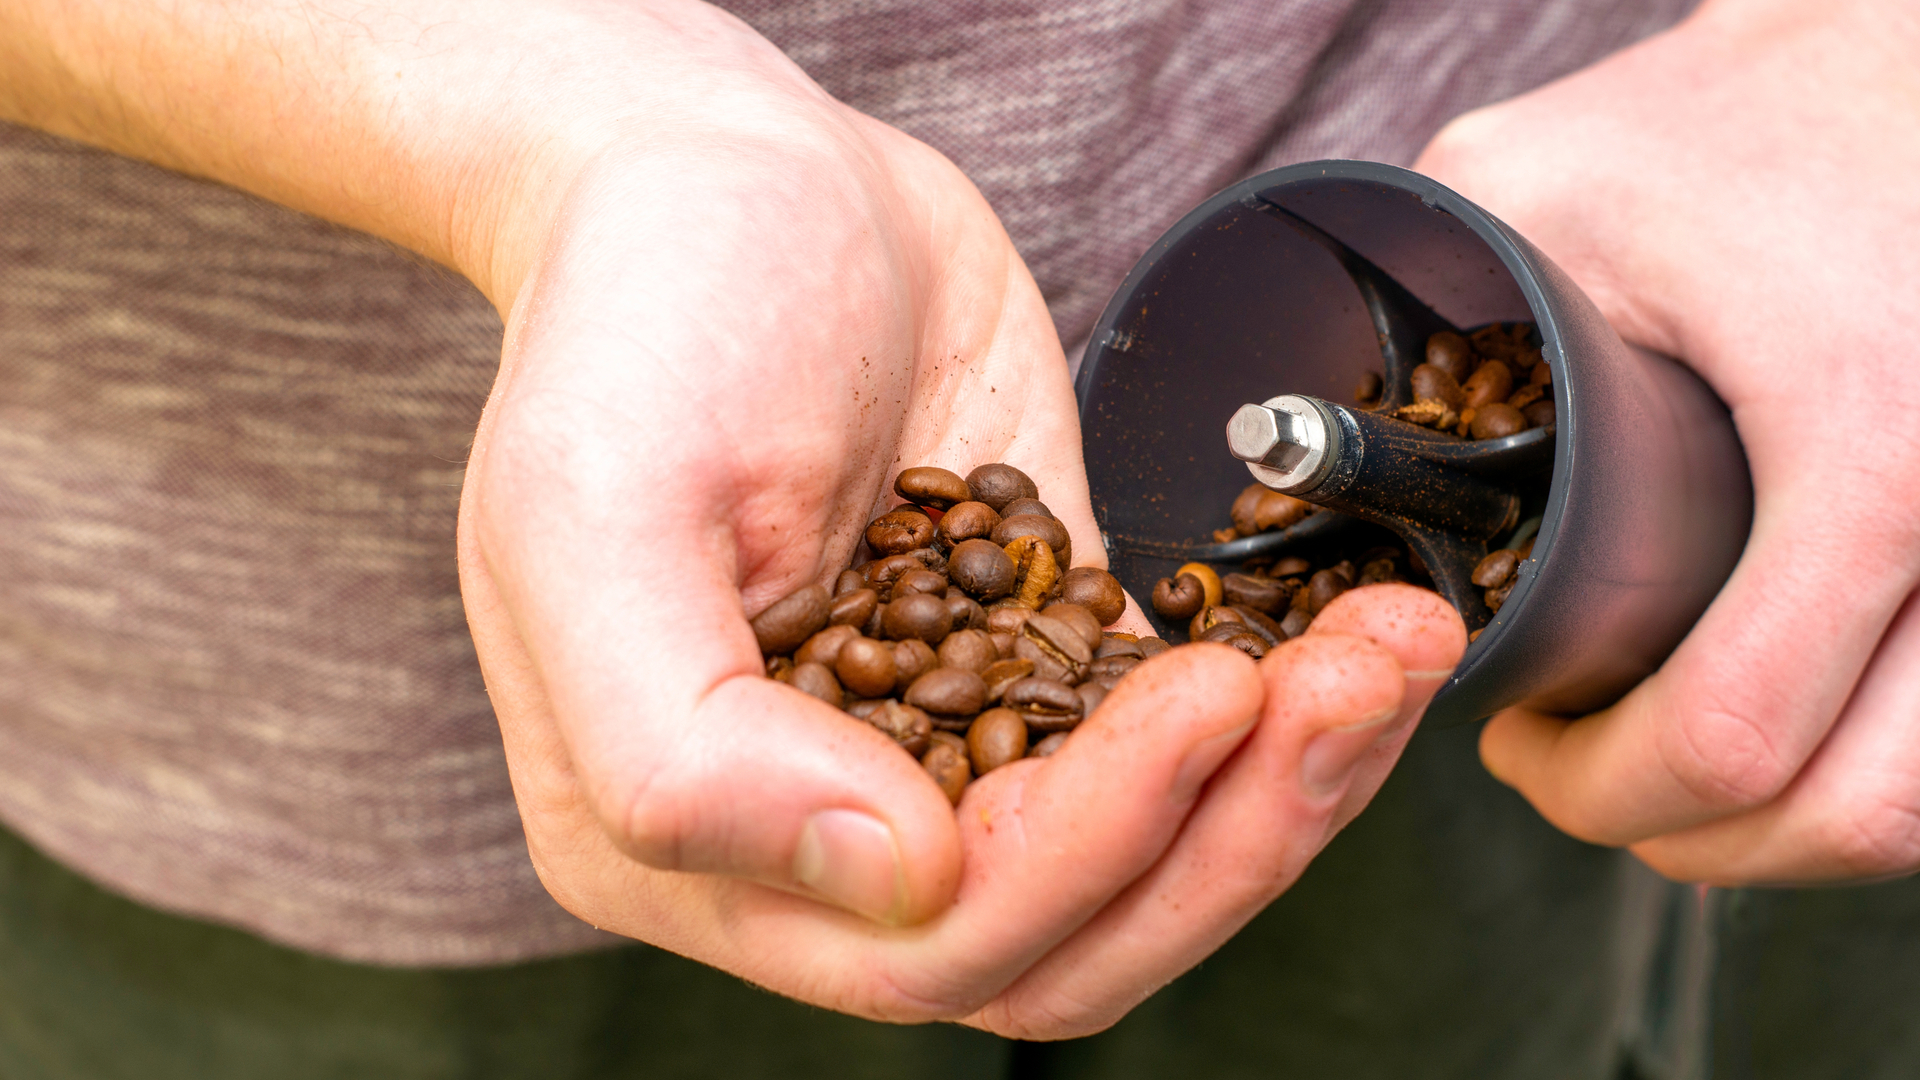 Coffee beans being poured by hand into a manual coffee grinder demonstrating how to make espresso